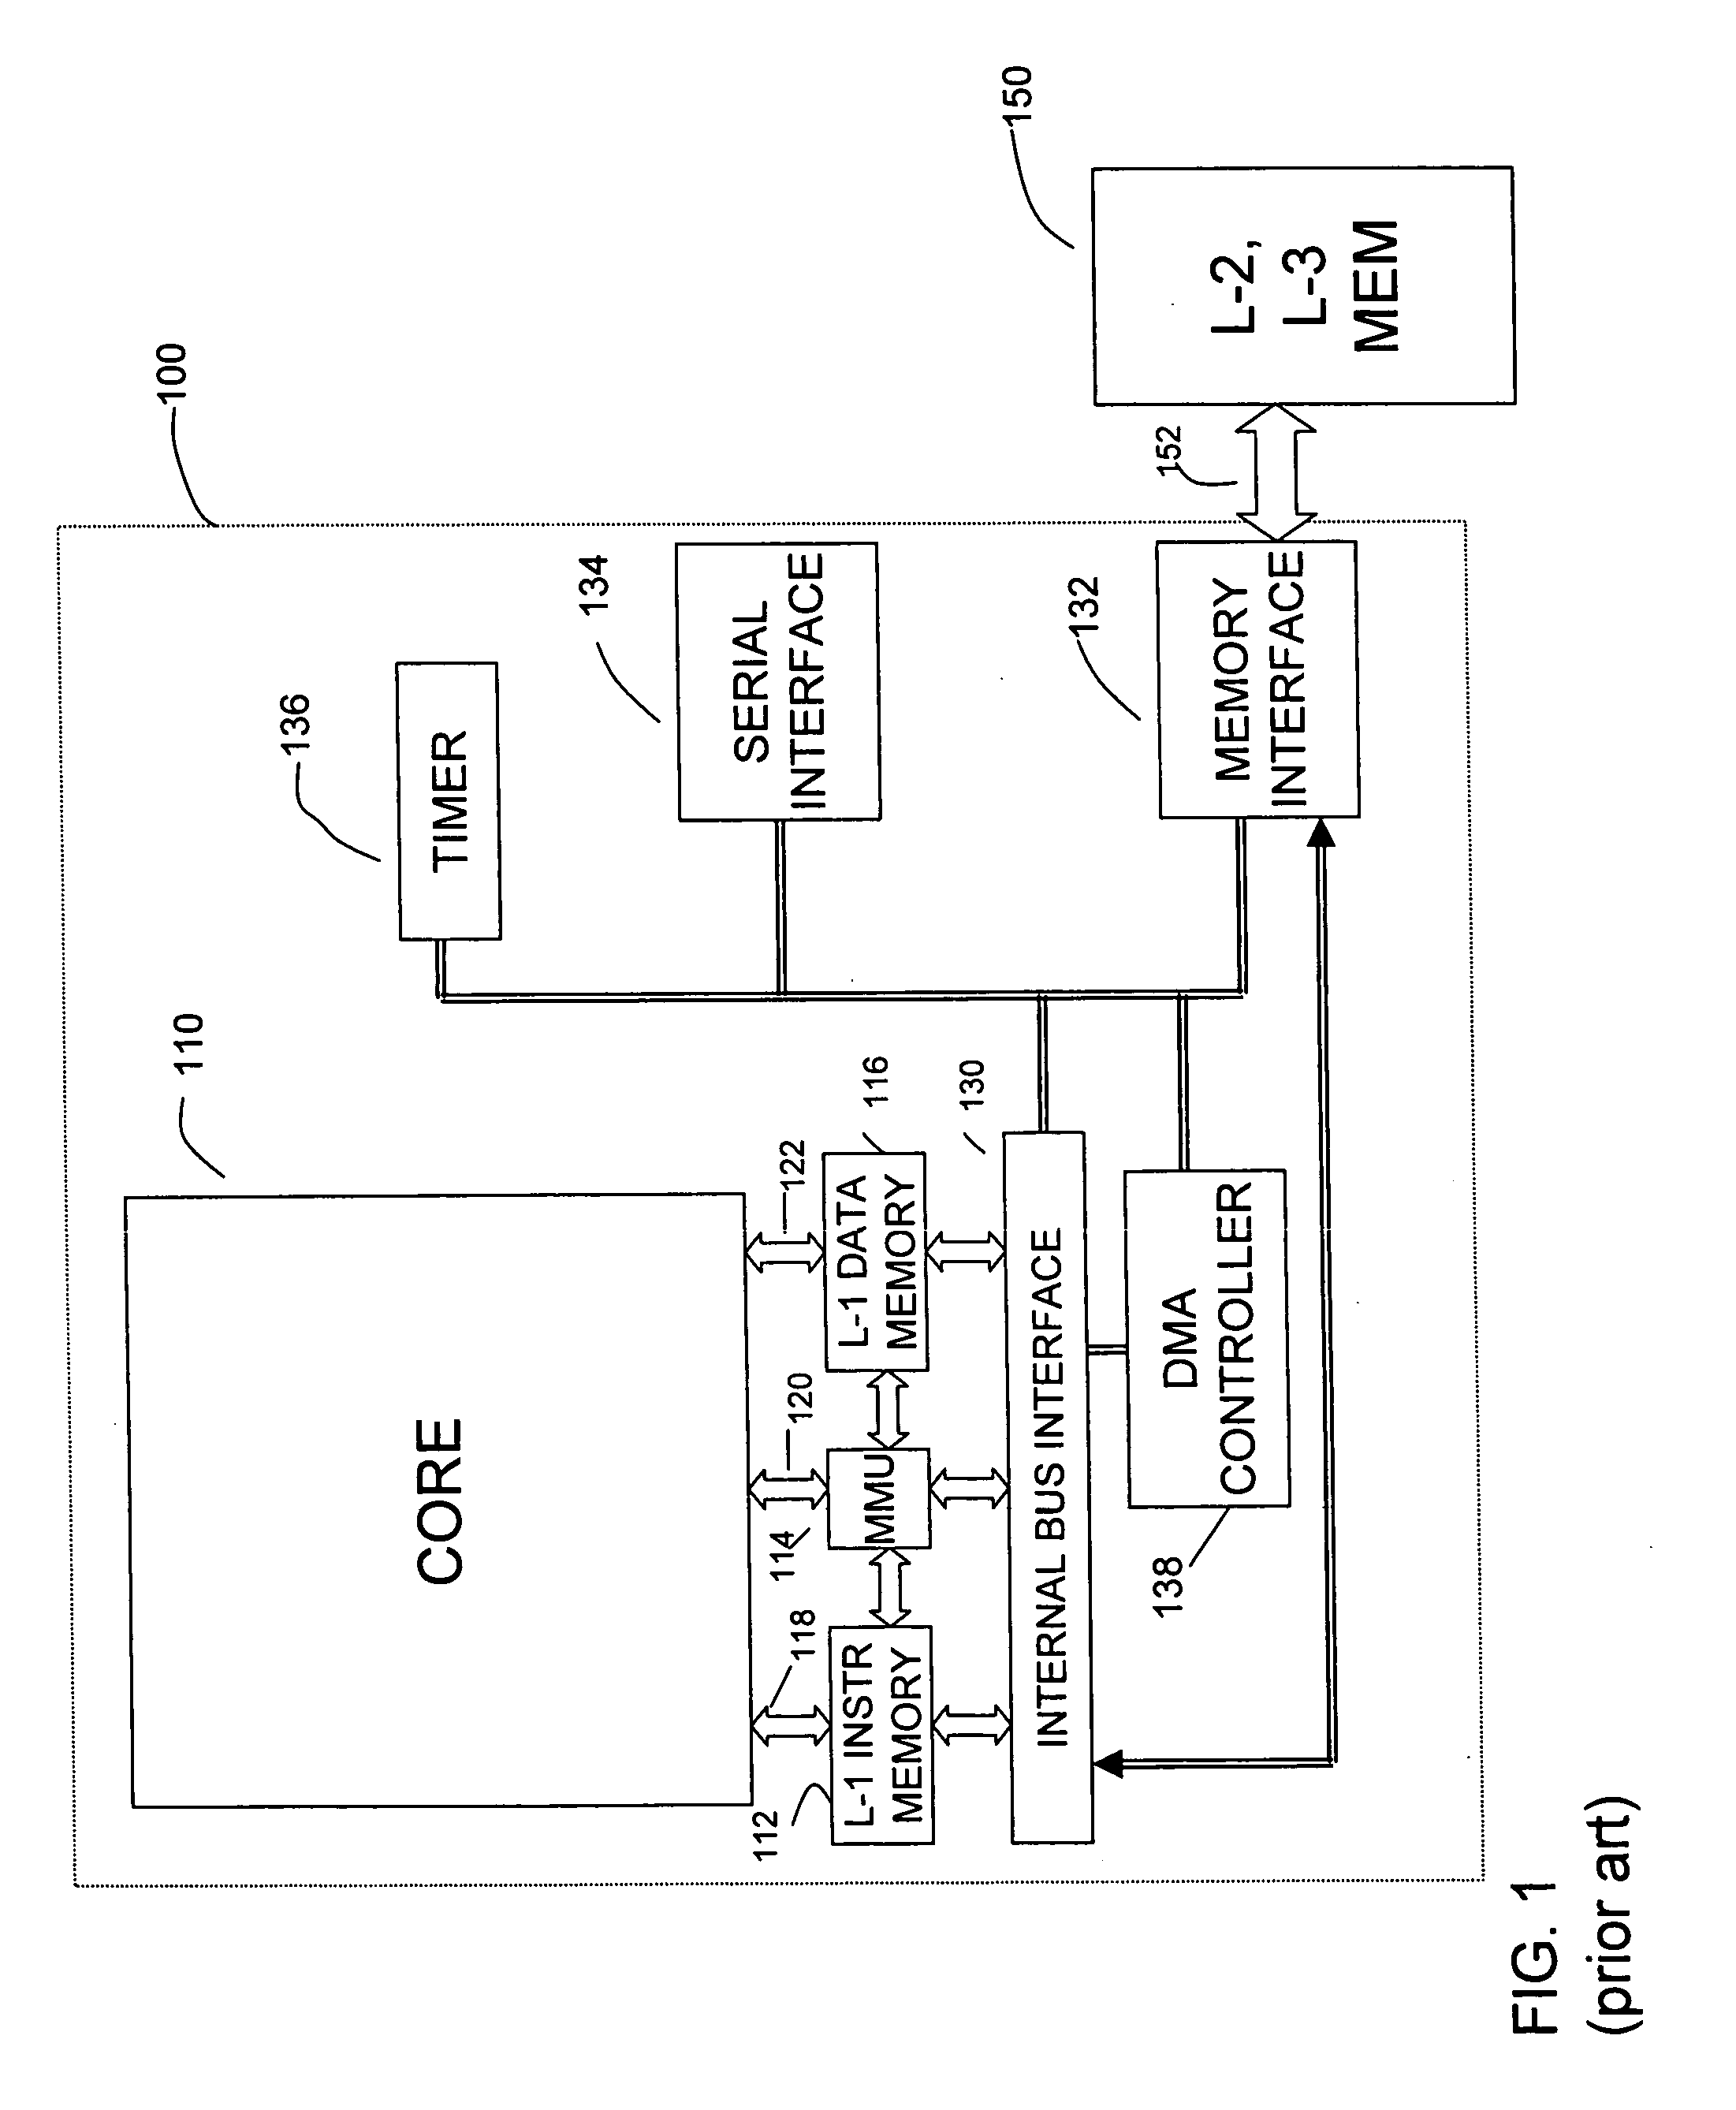 Cache memory with improved replacement policy